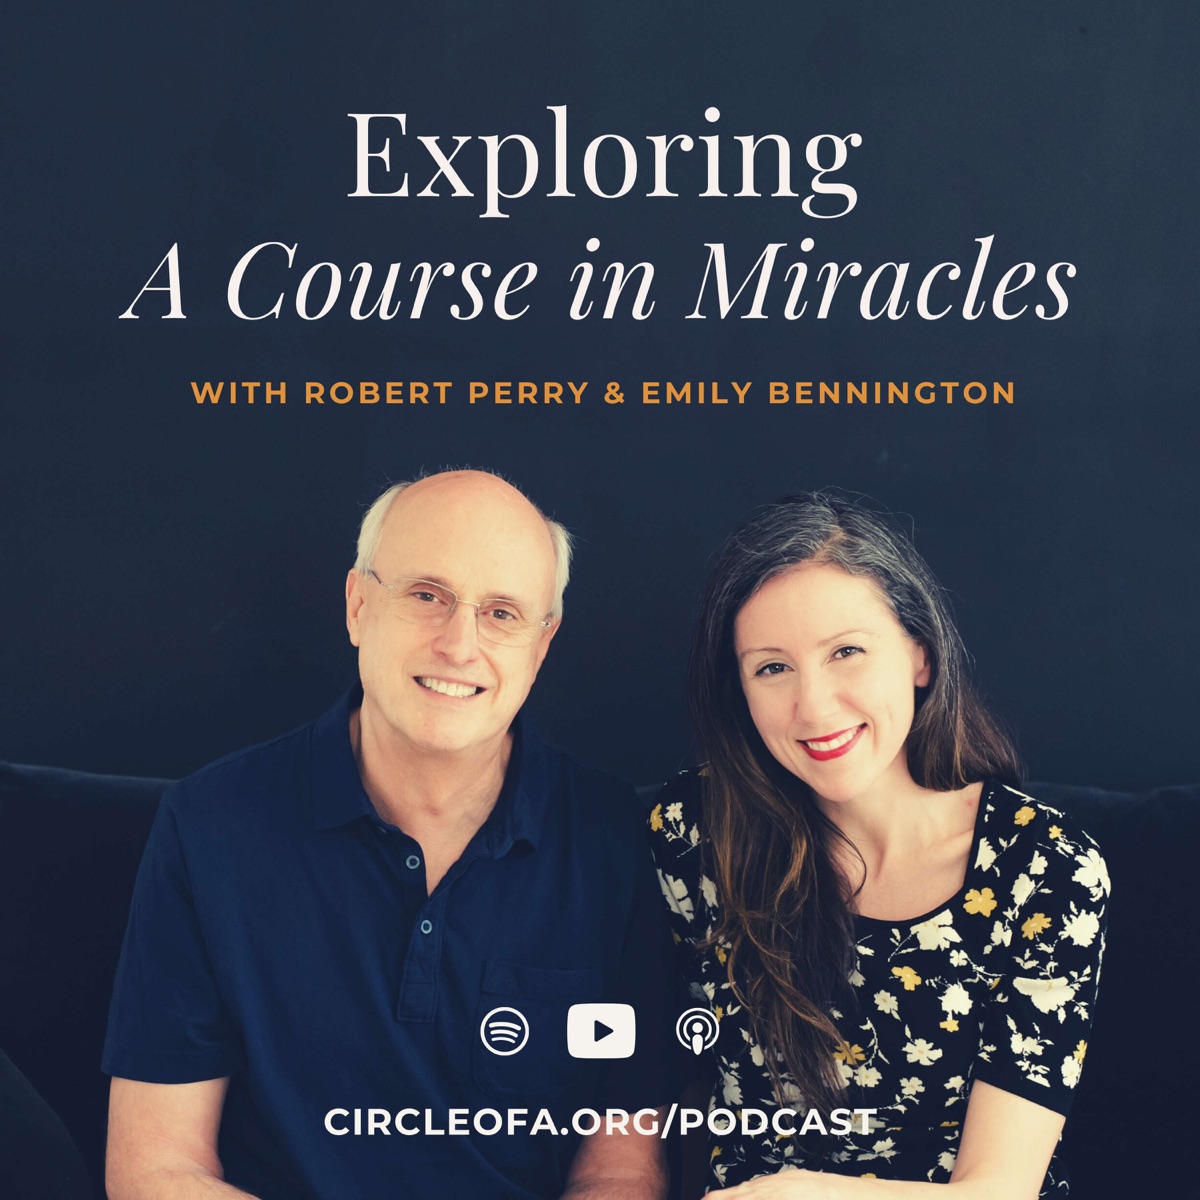 The Case For Life After Death With Jeffrey Mishlove – Exploring A Course in Miracles